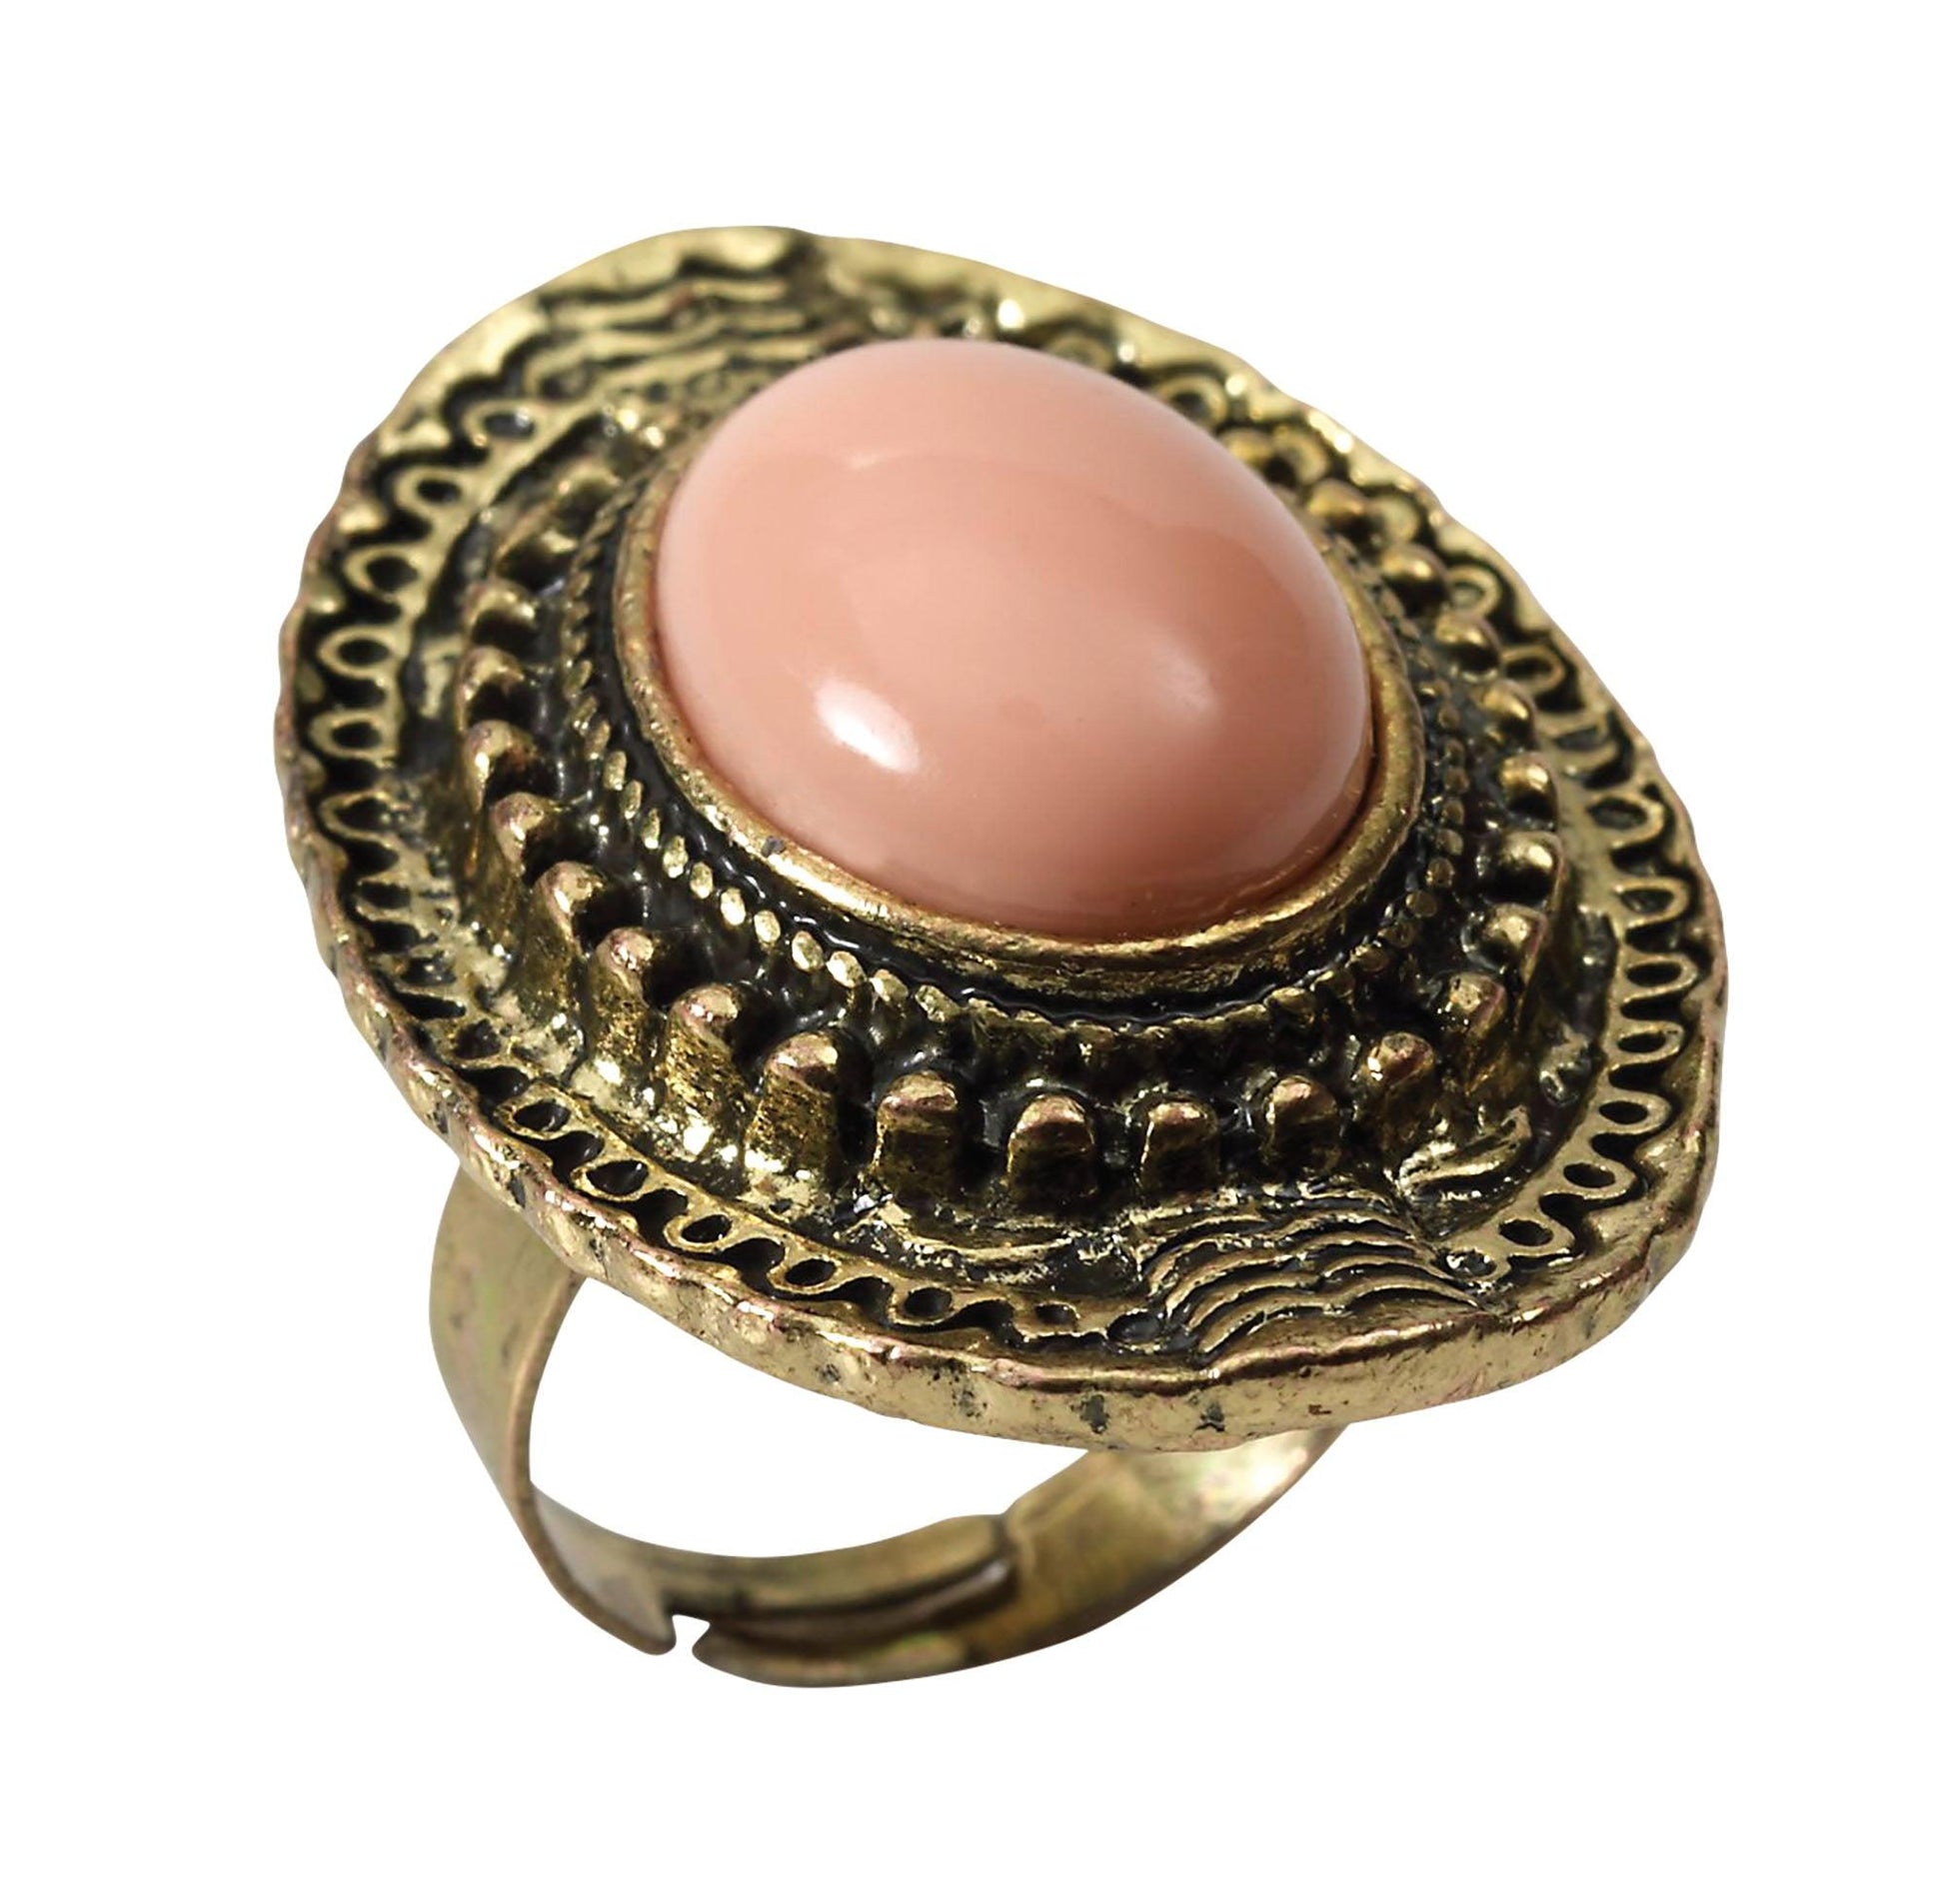 Pink Stone Ring - Labreeze